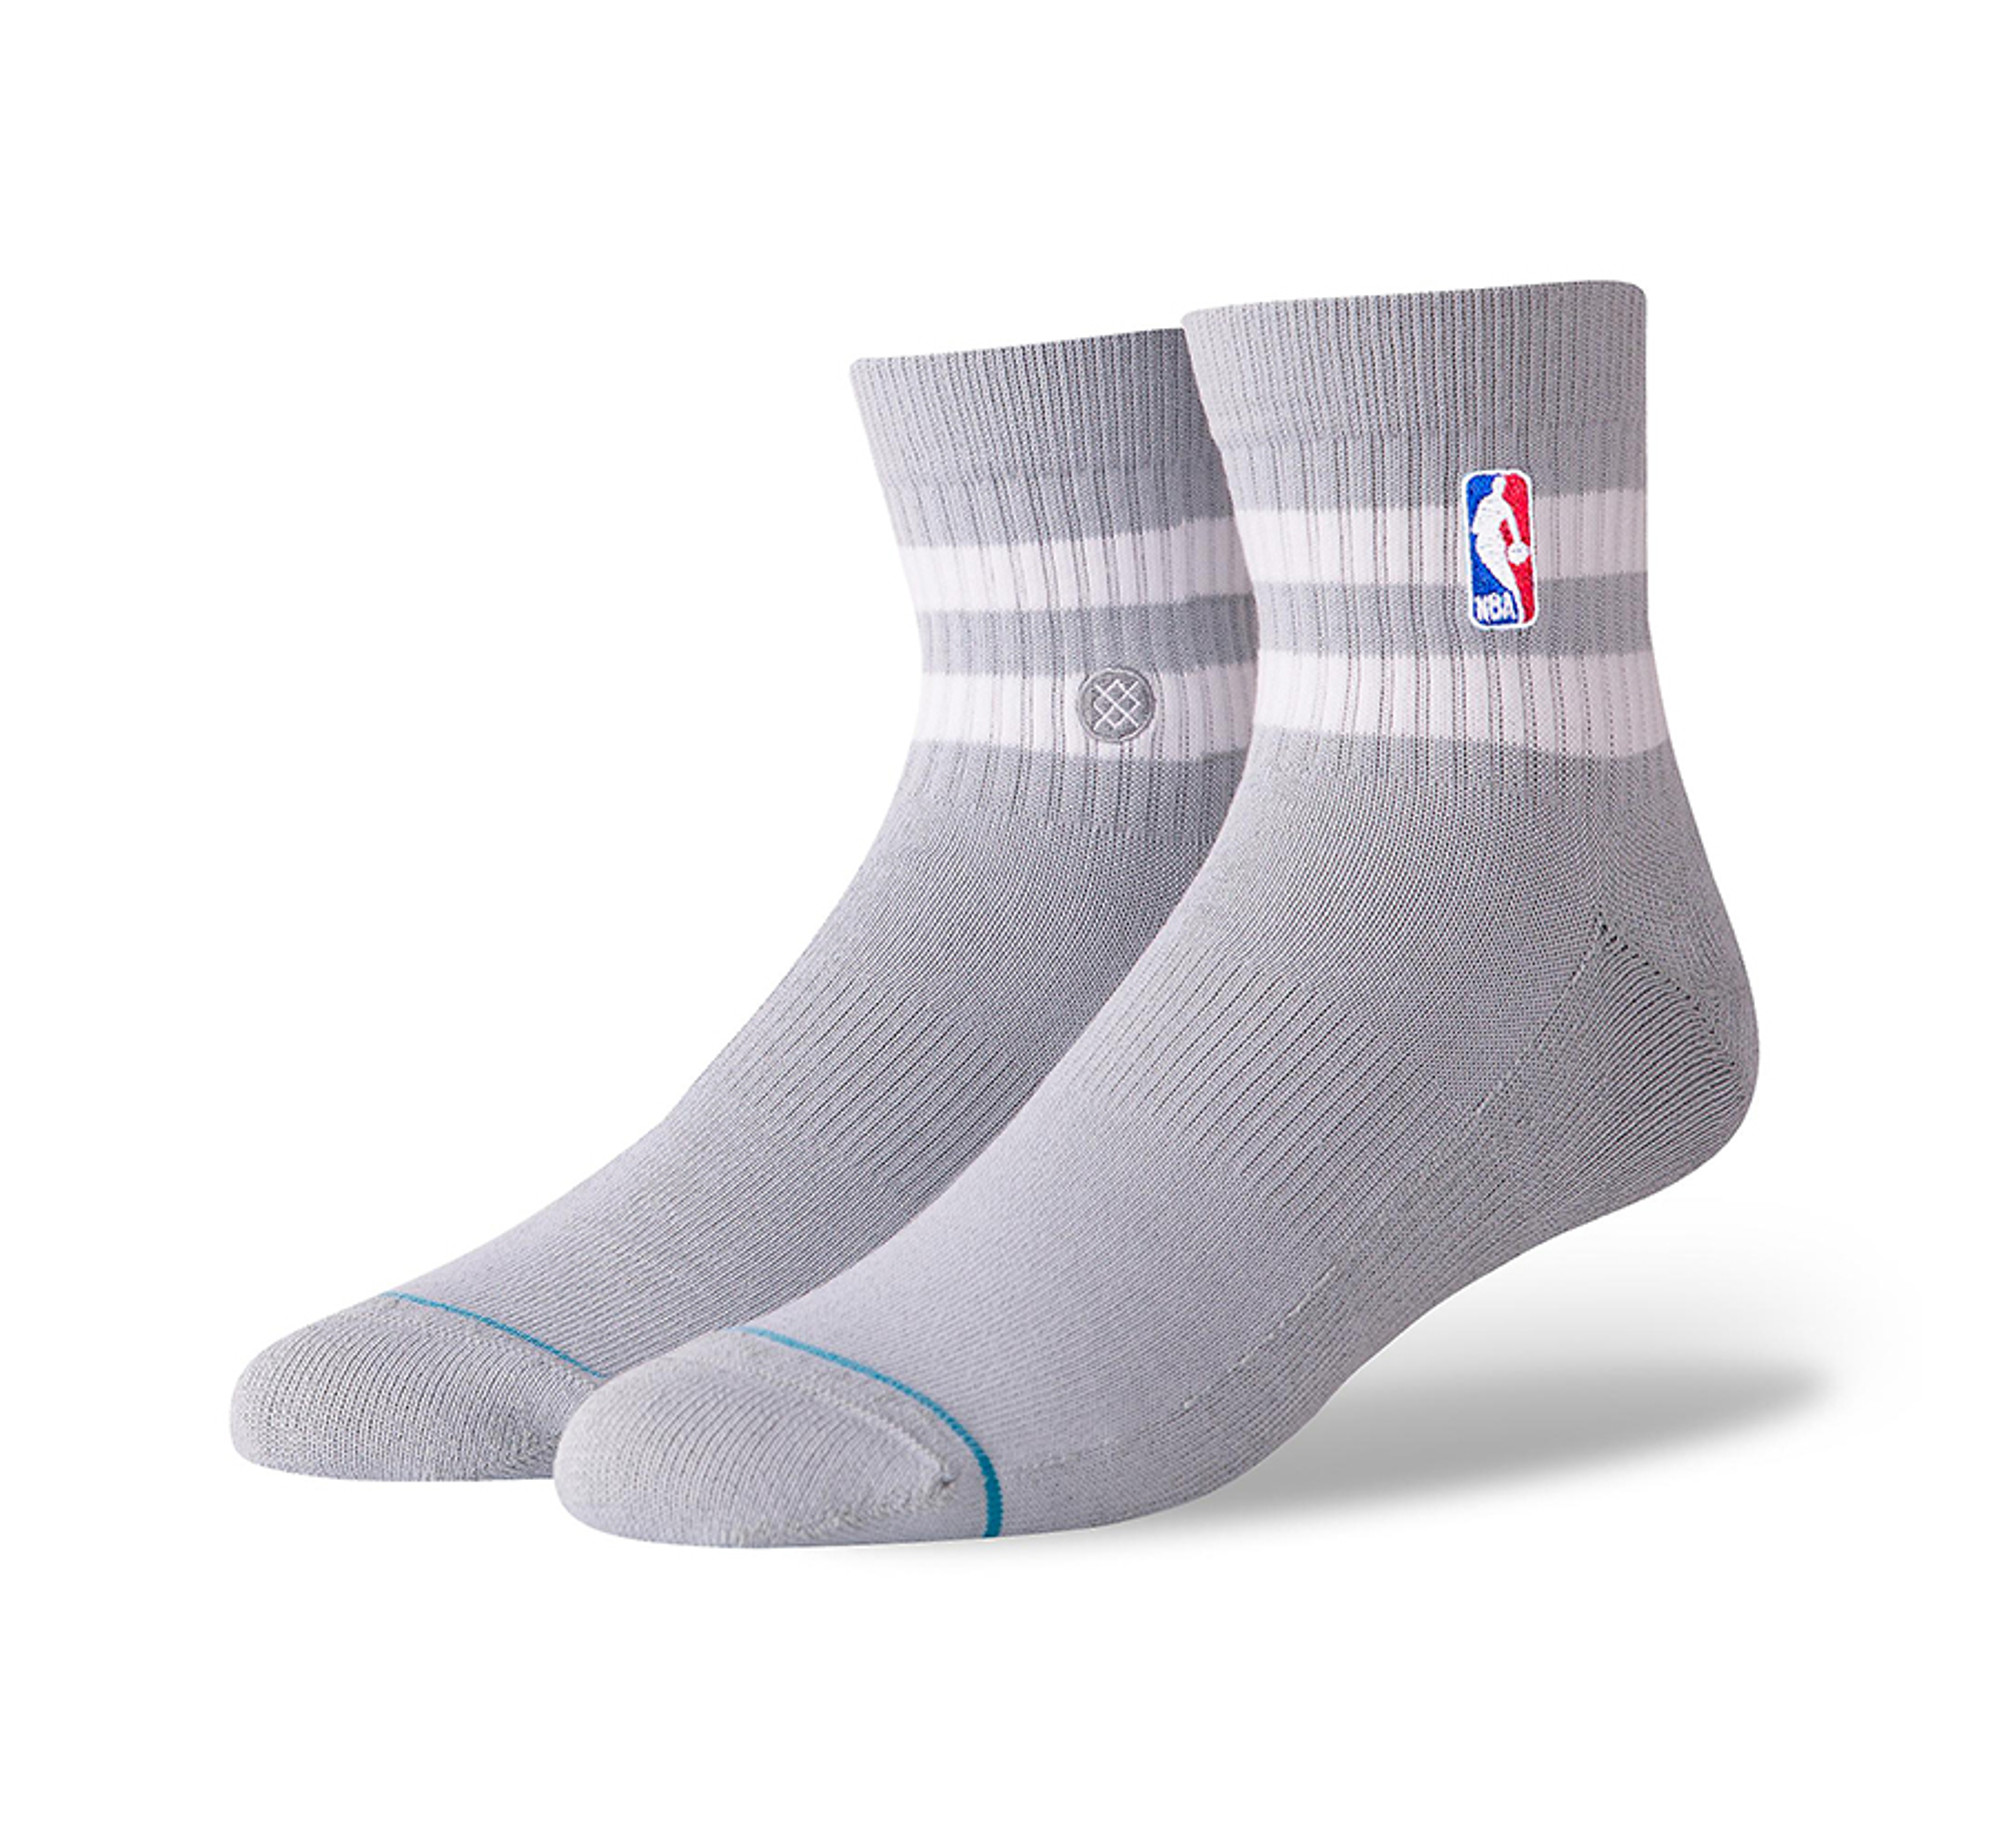 Stance NBA Hoven QTR | Shop online now at Sunlight Station